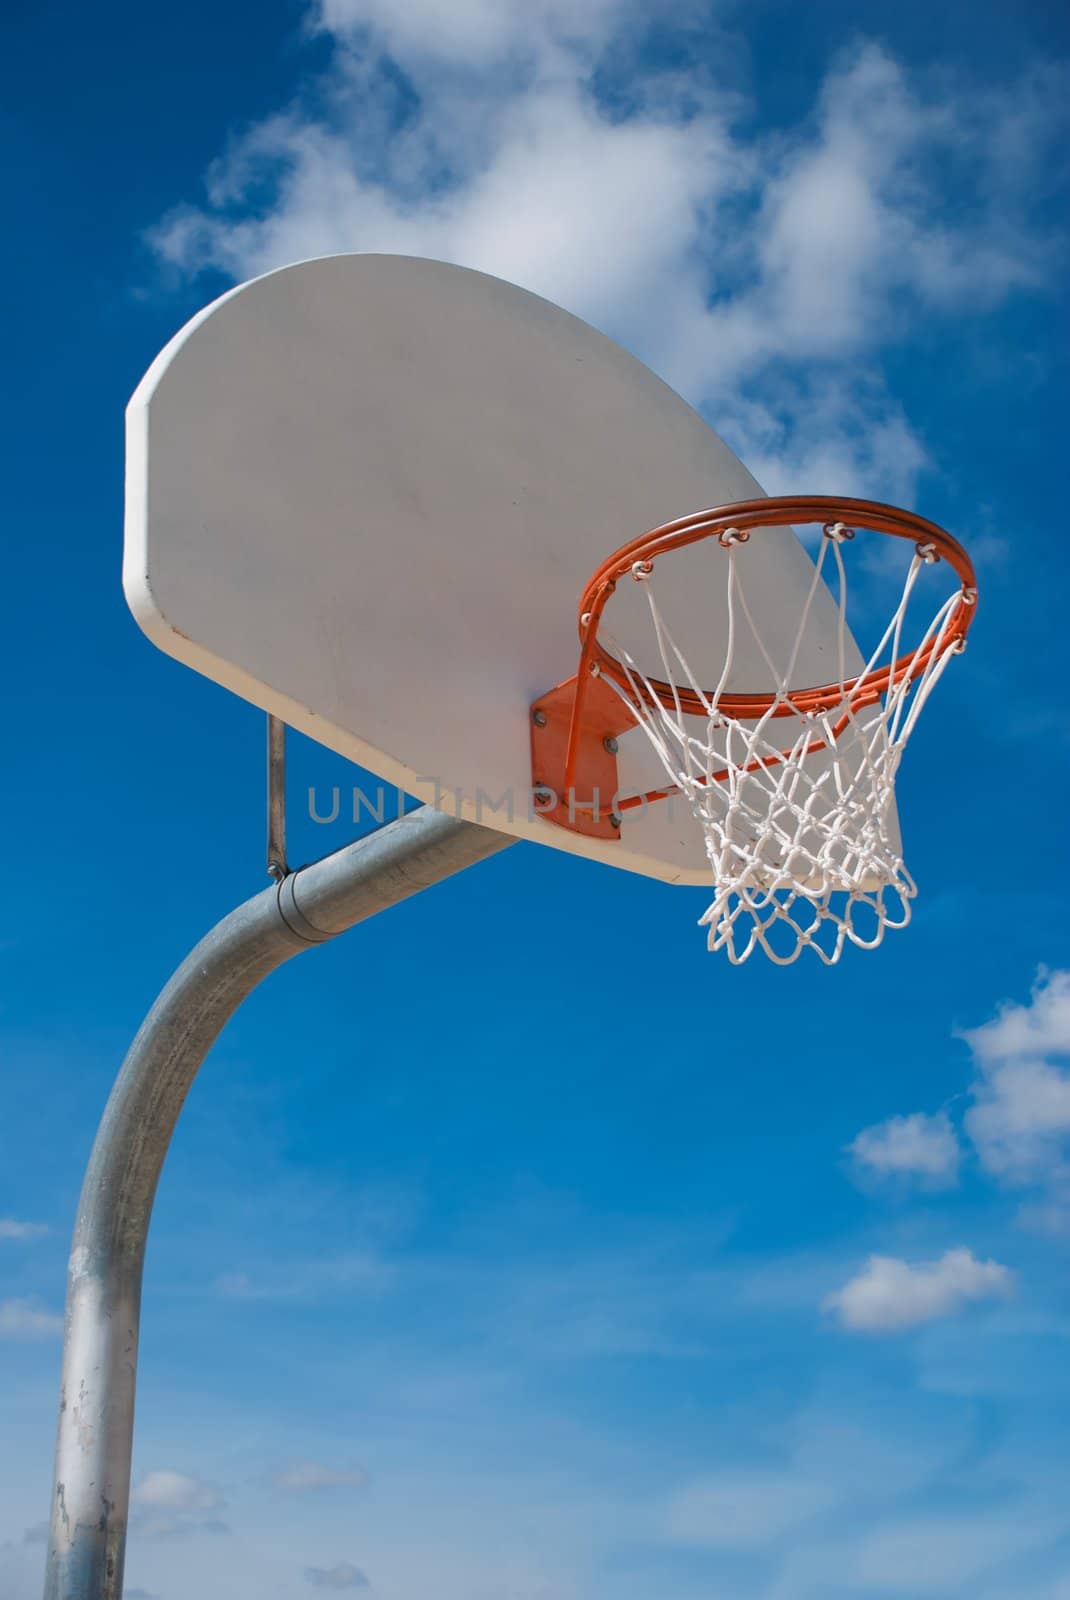 Basketball Hoop and Standard by pixelsnap